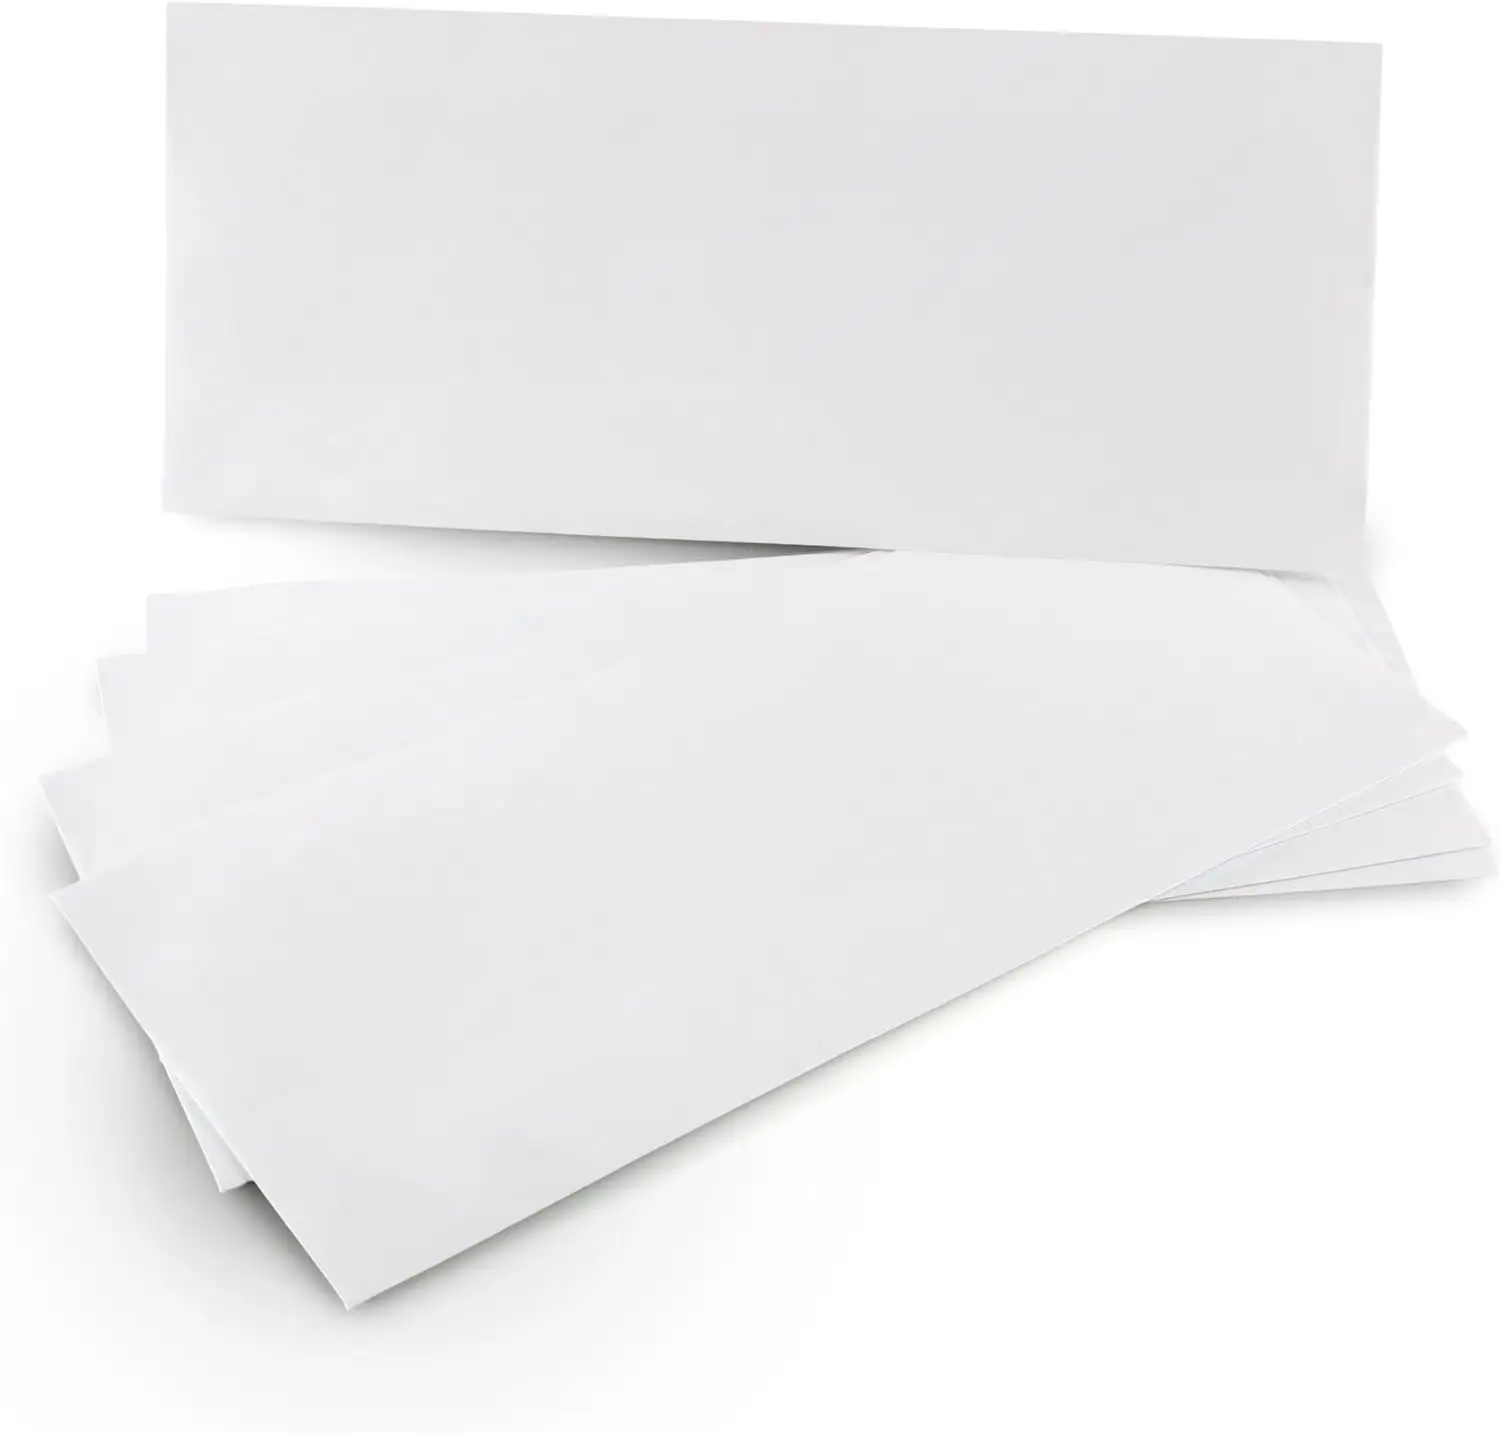 where to buy quality Tinted Self-Seal Envelopes - No Window from wholesale suppliers near me